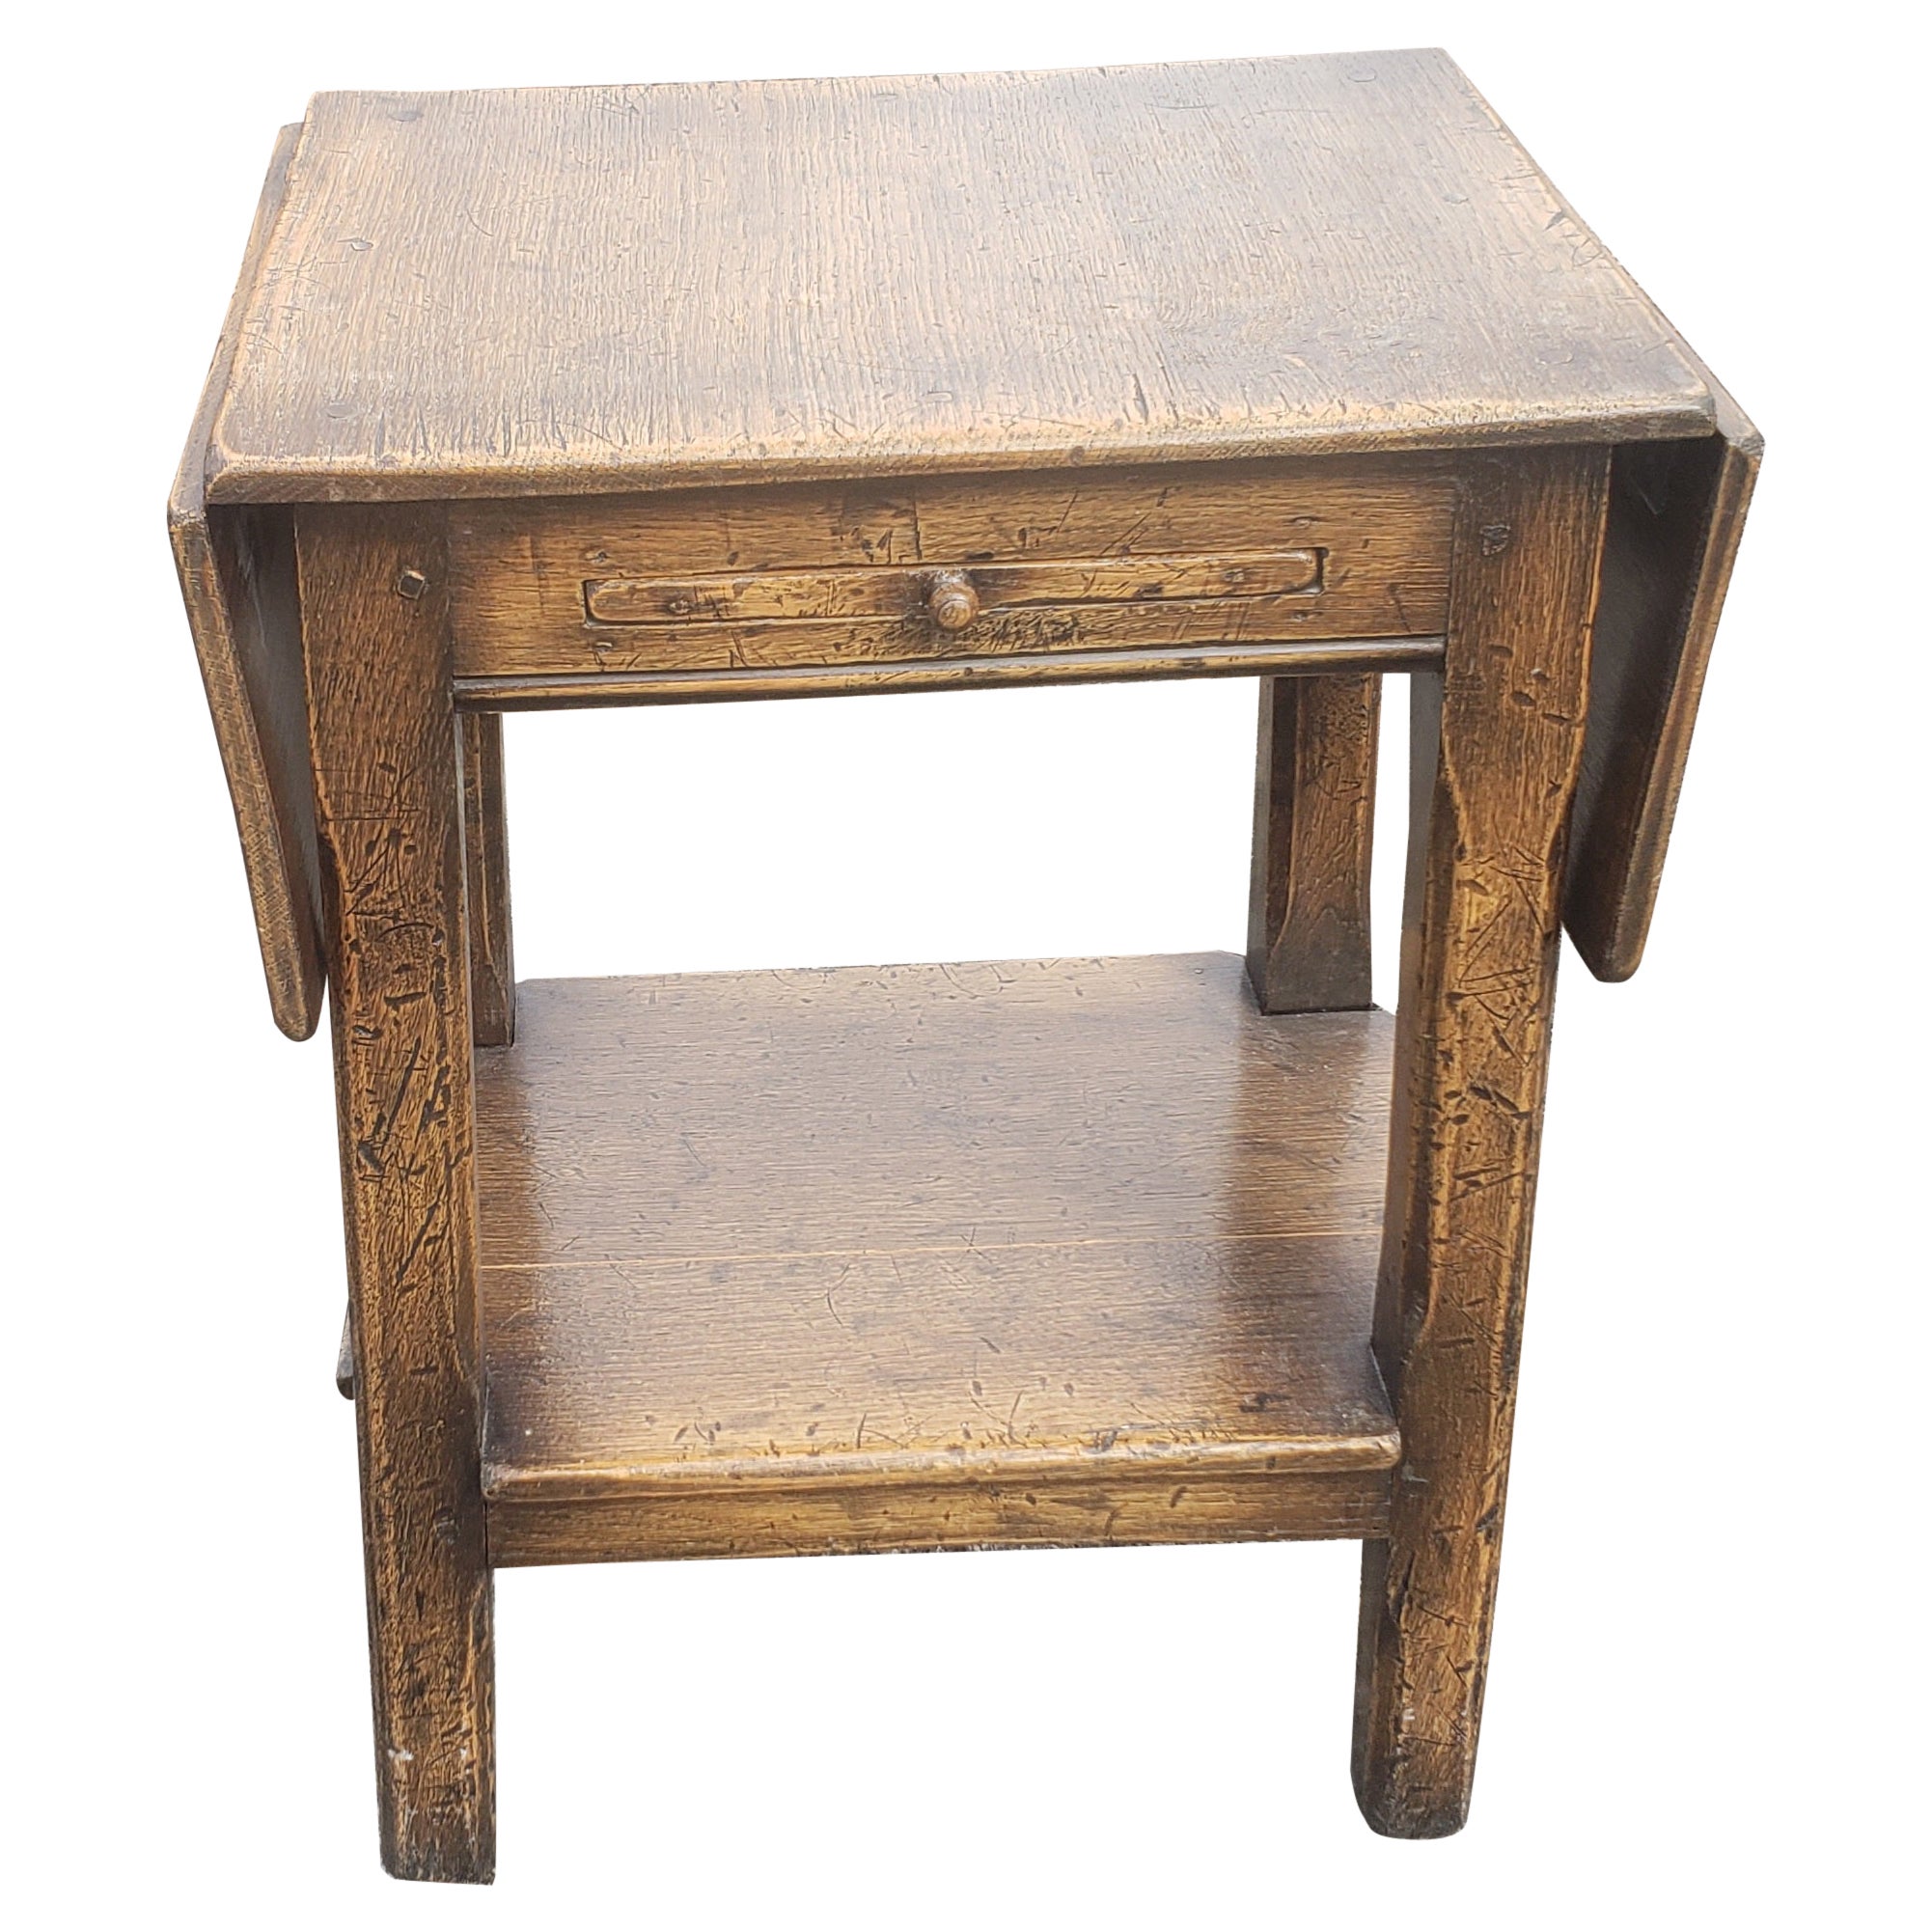 Early American Oak Drop-Leaf Side Table with Pull-Out Tray, circa 1890s